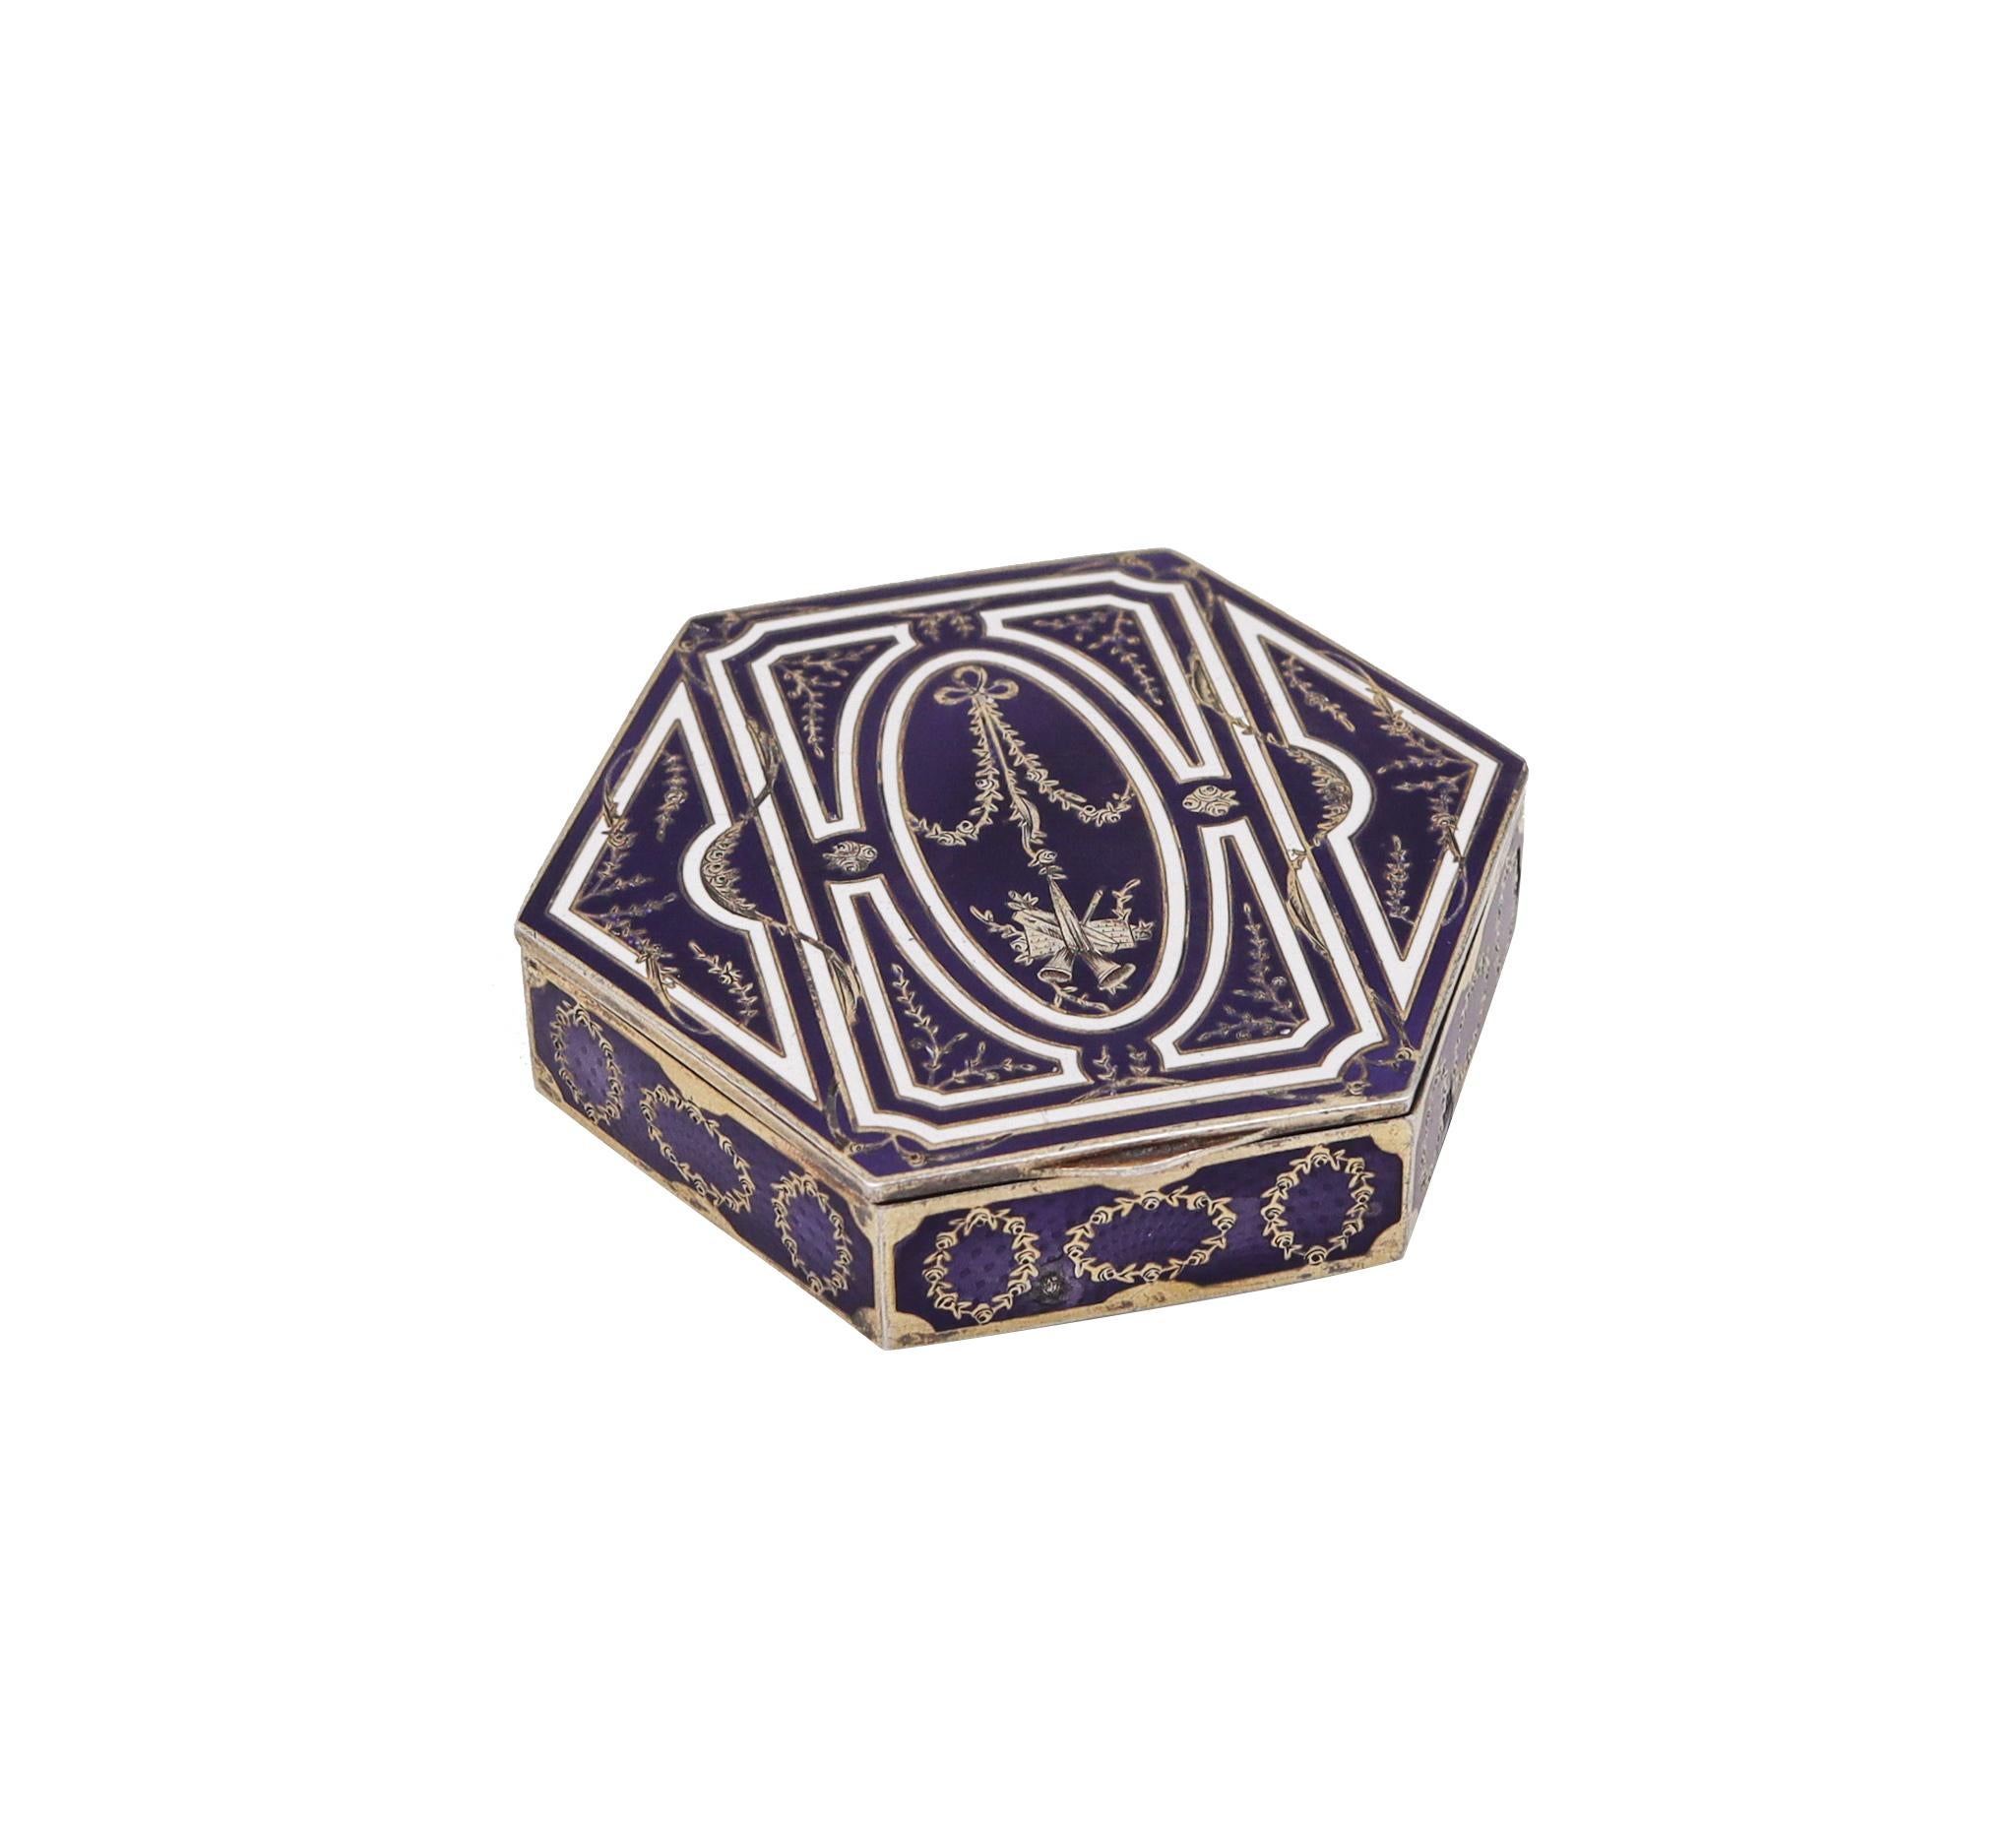 French 1905 Edwardian Hexagonal Snuff Box Sterling Silver with Guilloche Enamel For Sale 1